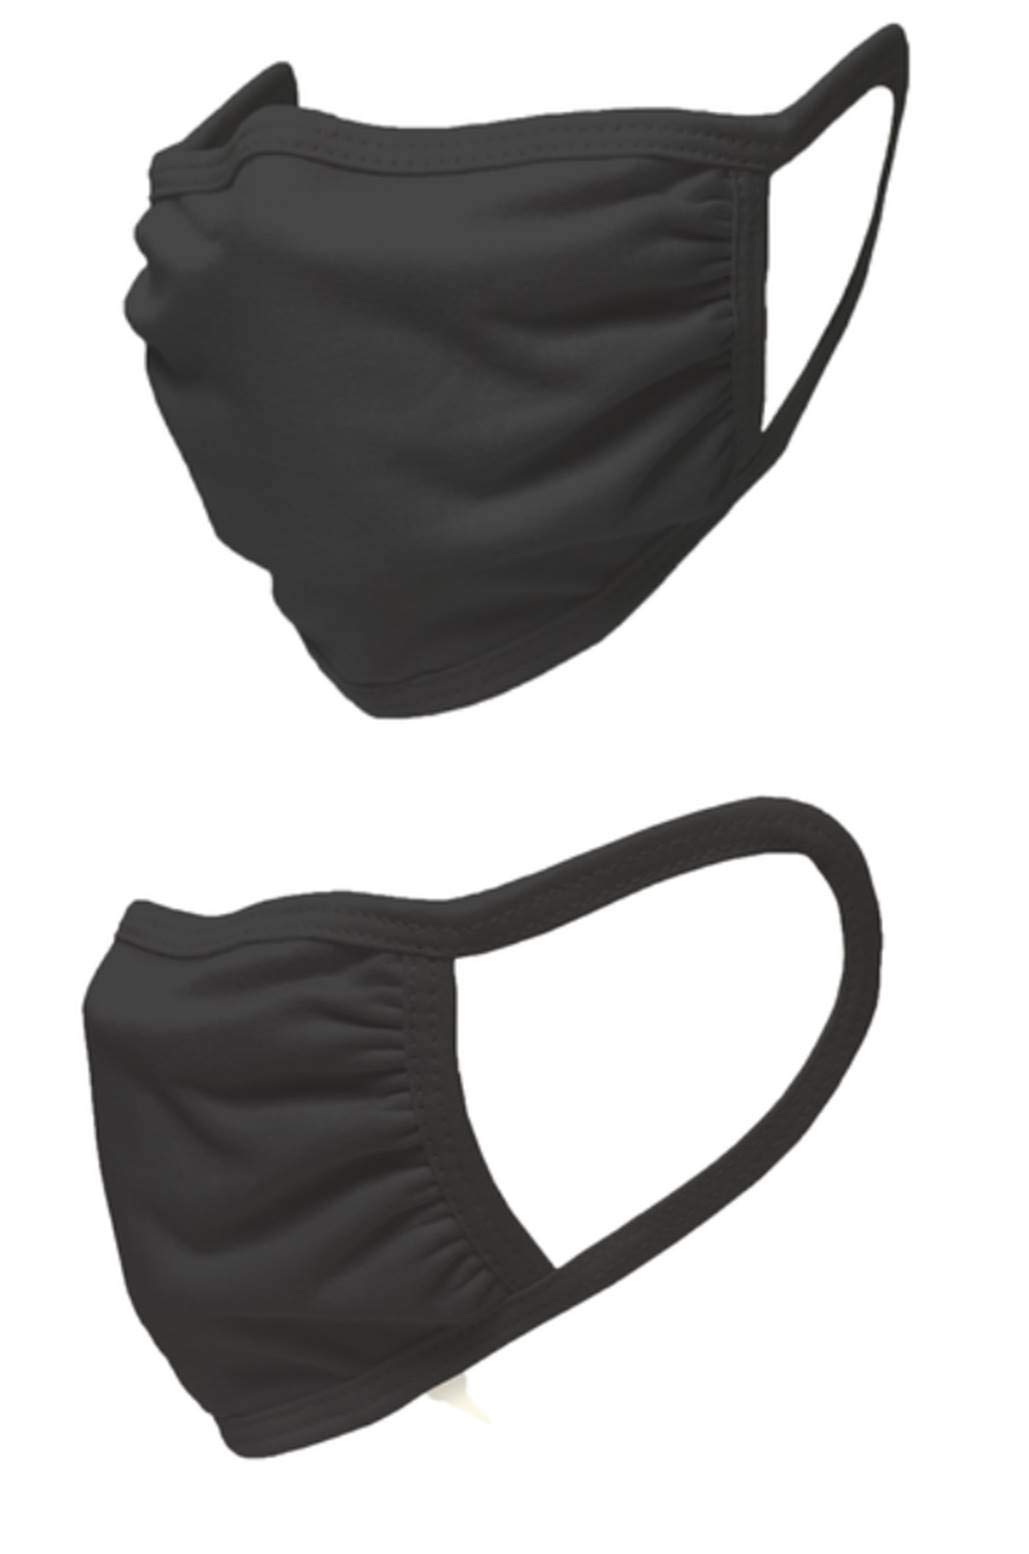 Coughy Filter Face Mask Funny Coffee Quarantine Graphic Novelty Nose And Mouth Covering - image 6 of 6